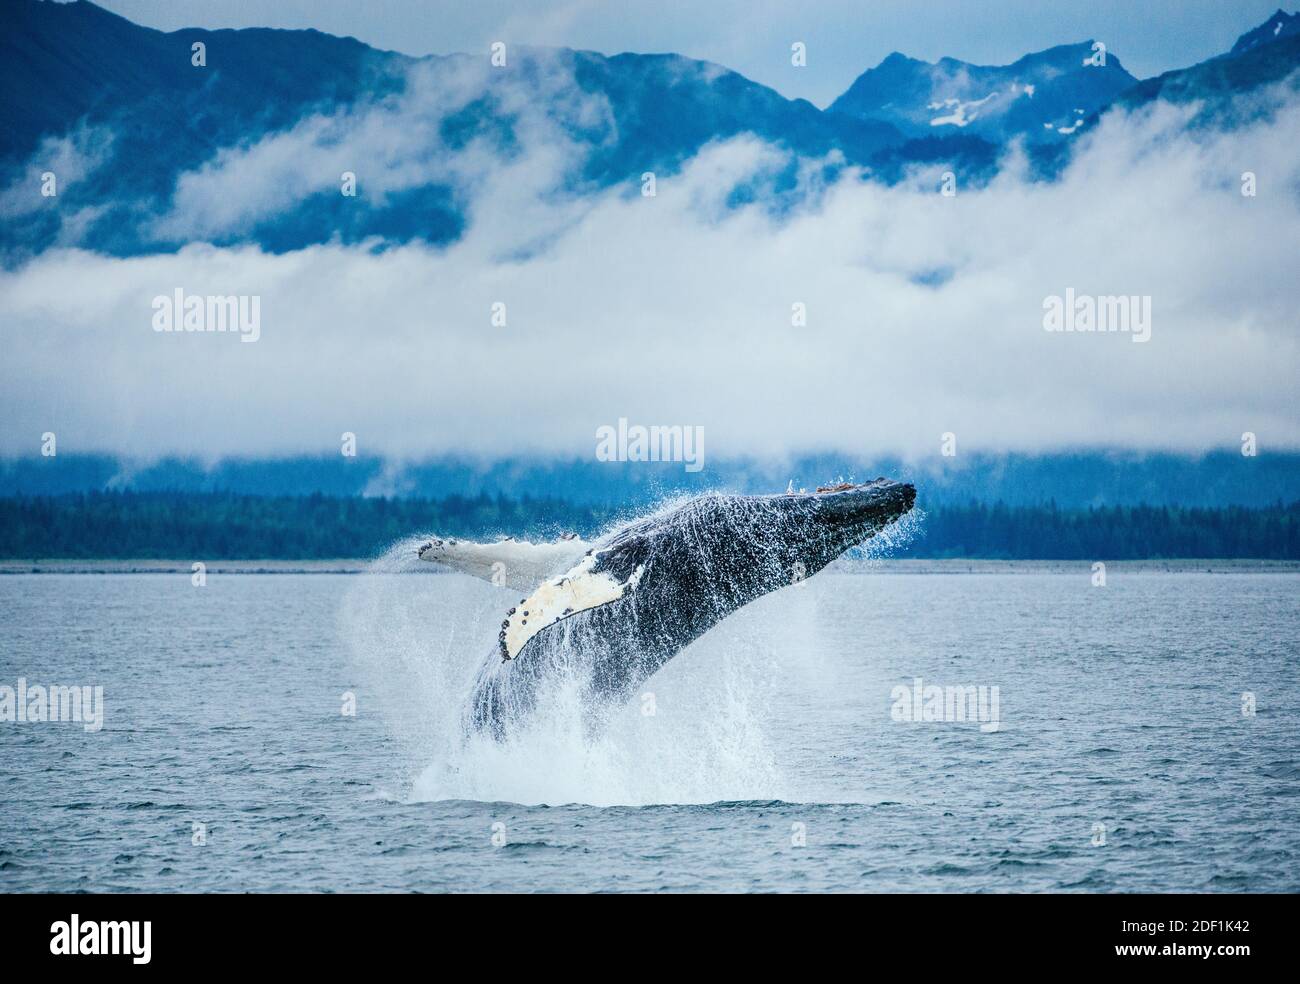 Adolescent humpack whale breaches in Alaska with snowy peaks behind Stock Photo